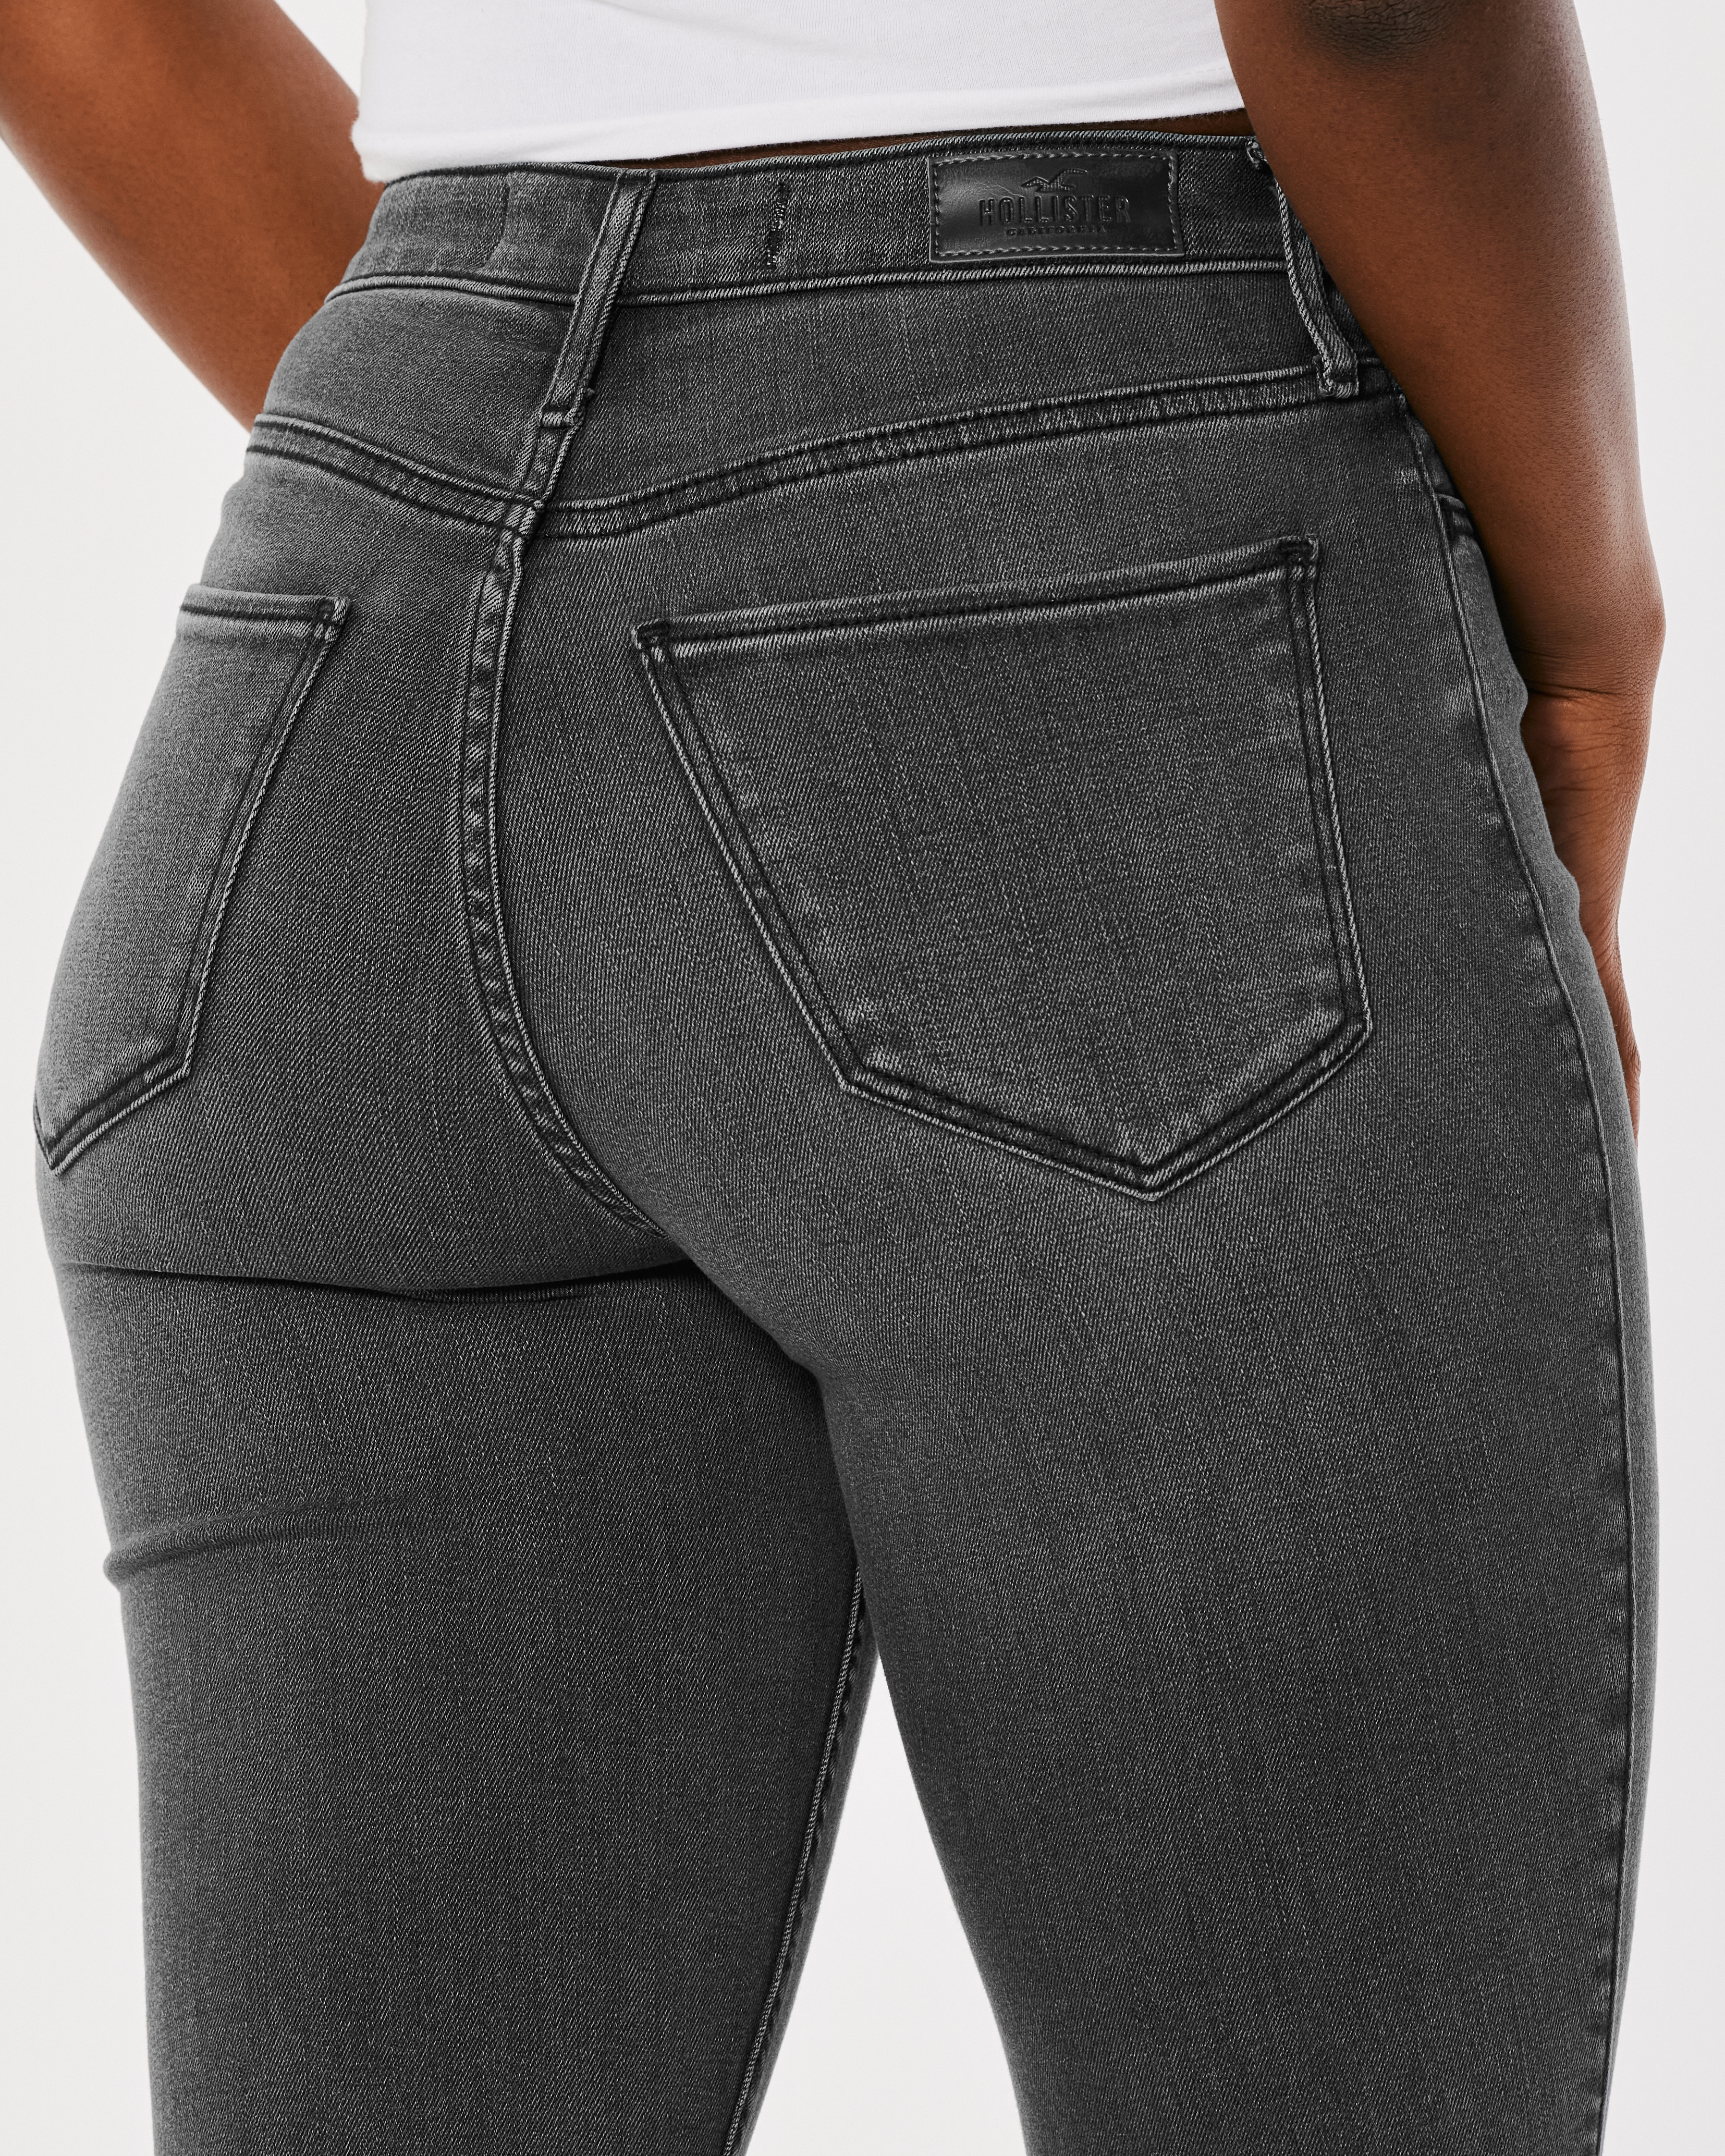 Curvy High-Rise Faded Black Flare Jeans